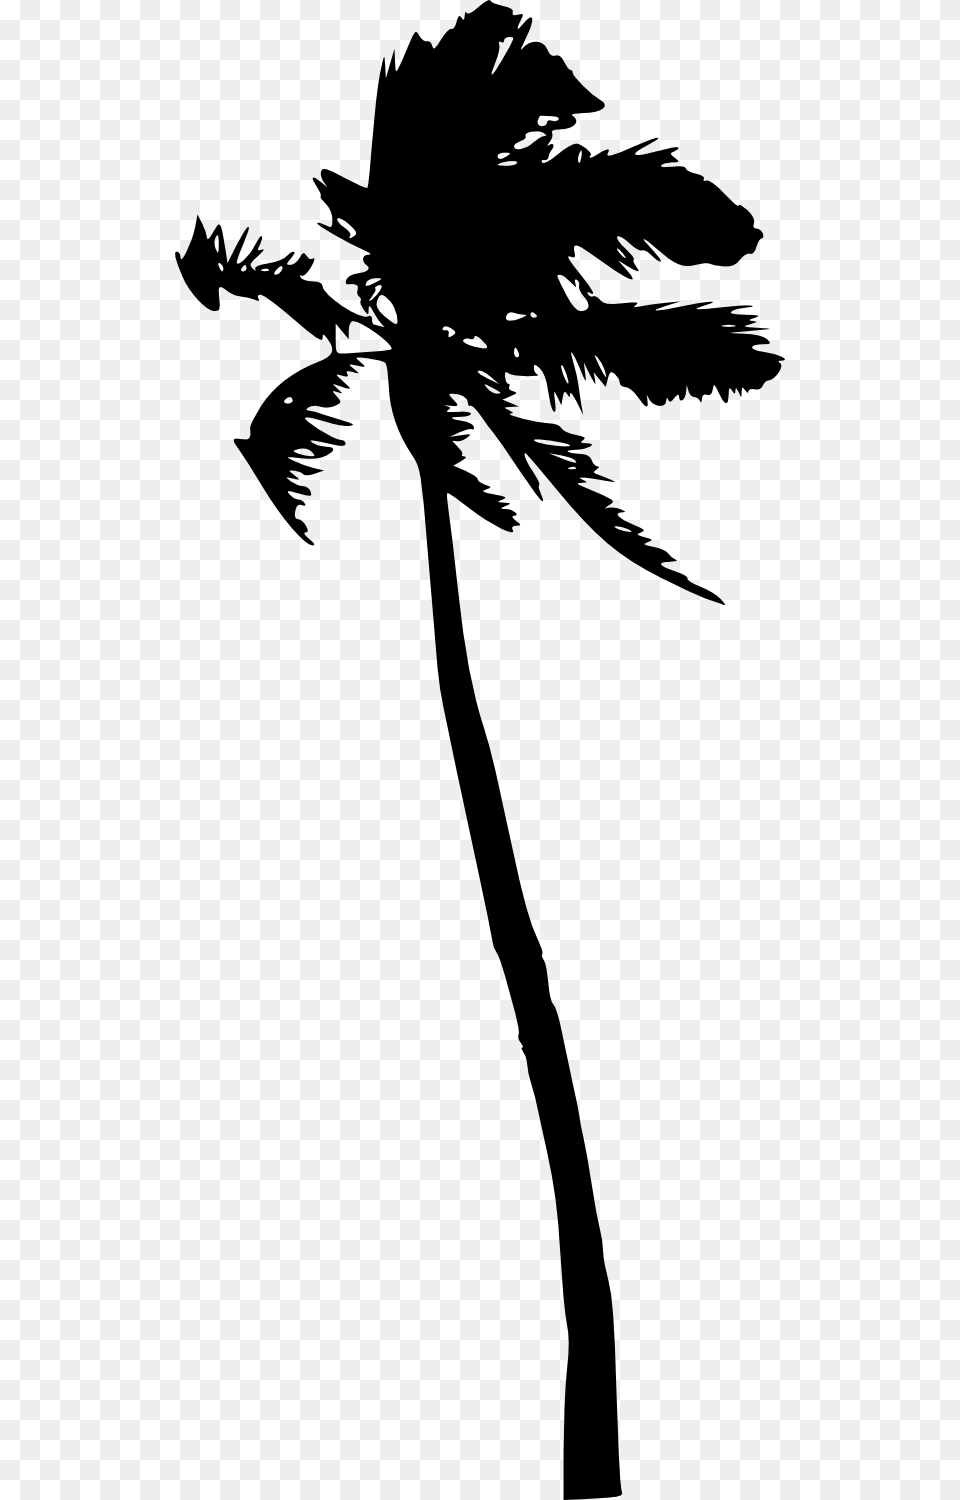 Palm Trees Portable Network Graphics Silhouette Clip, Palm Tree, Plant, Stencil, Tree Png Image